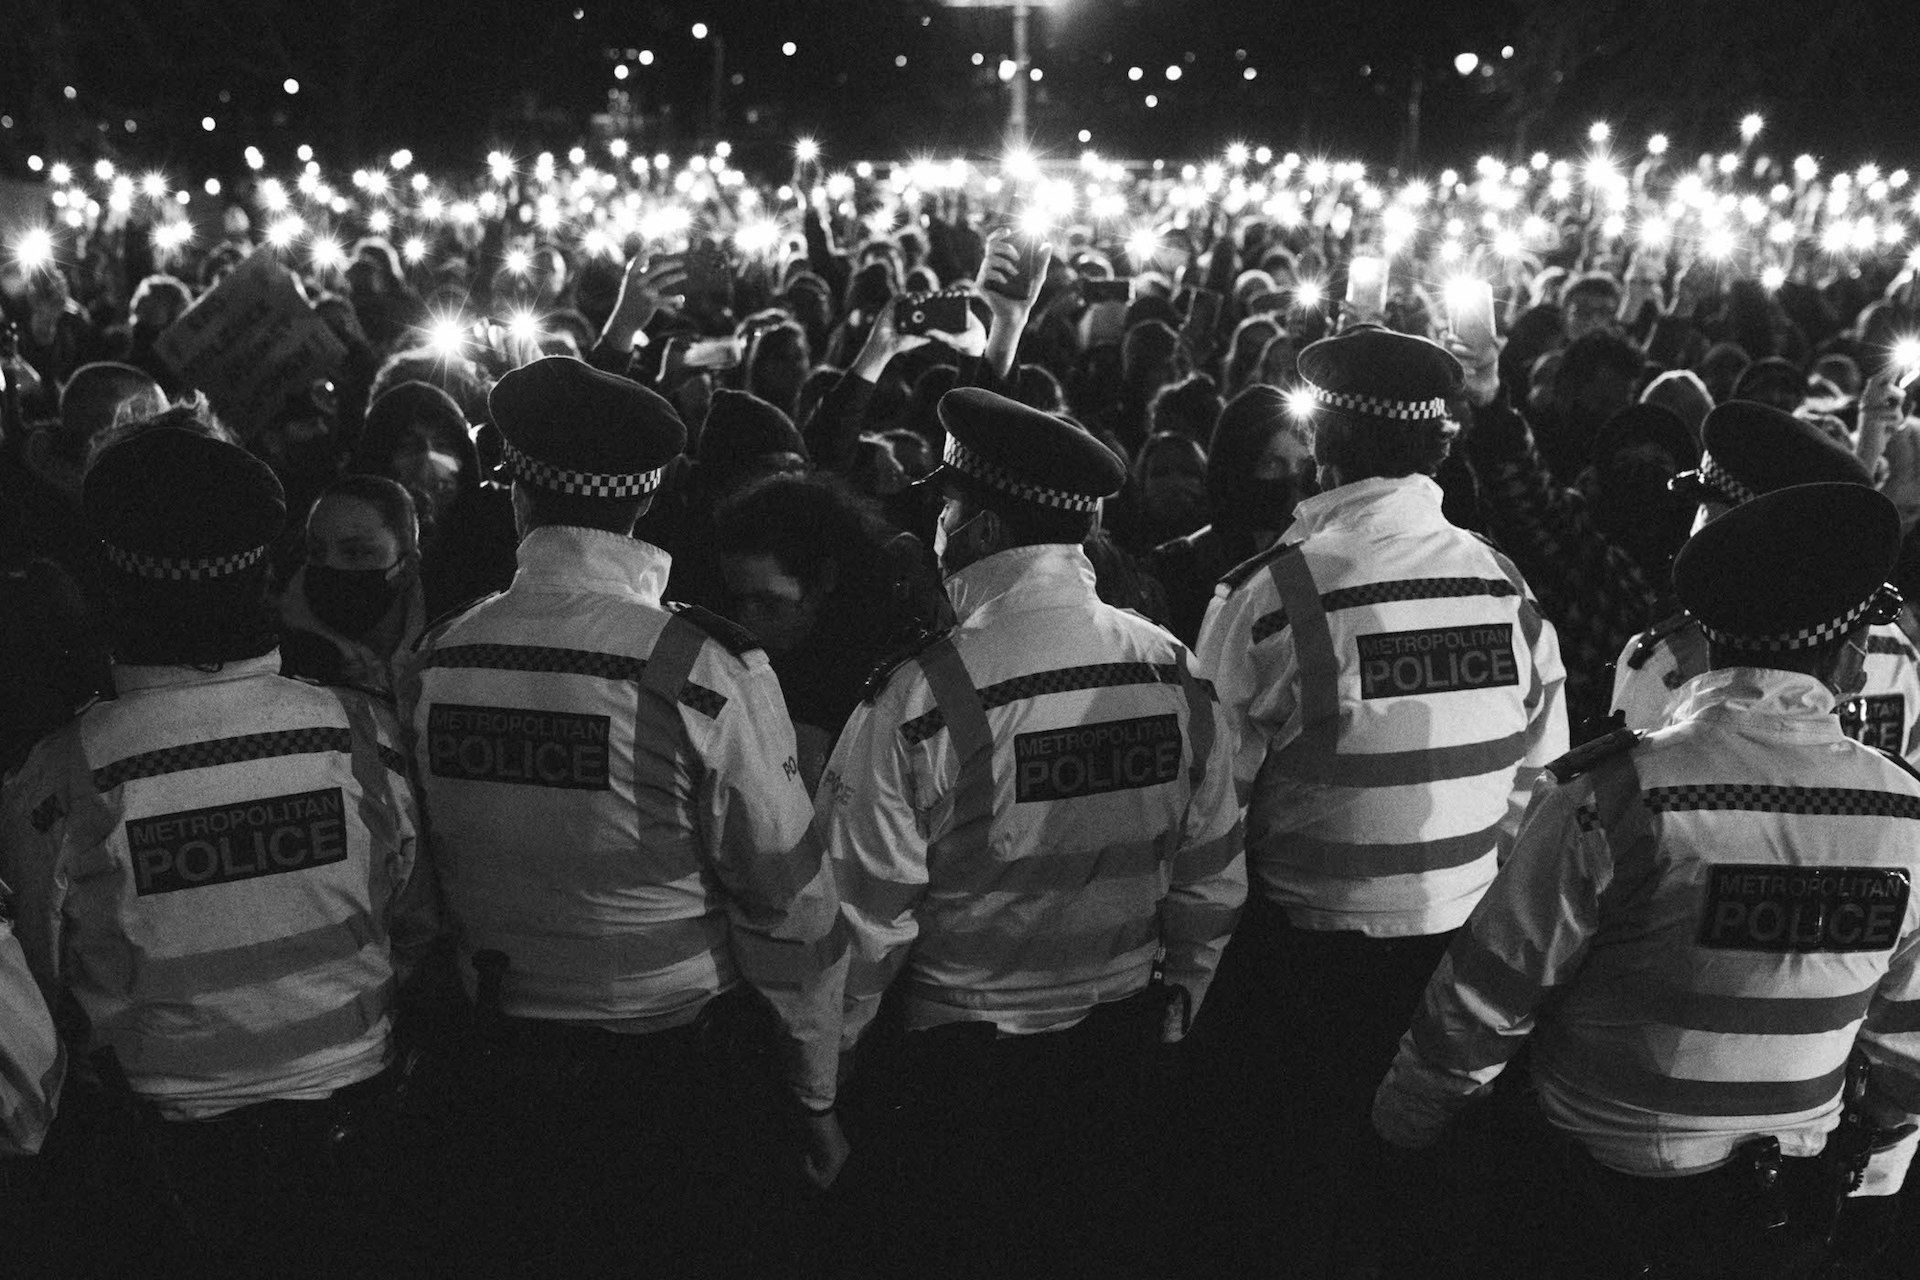 Police storming the vigil for Sarah Everard, in photos